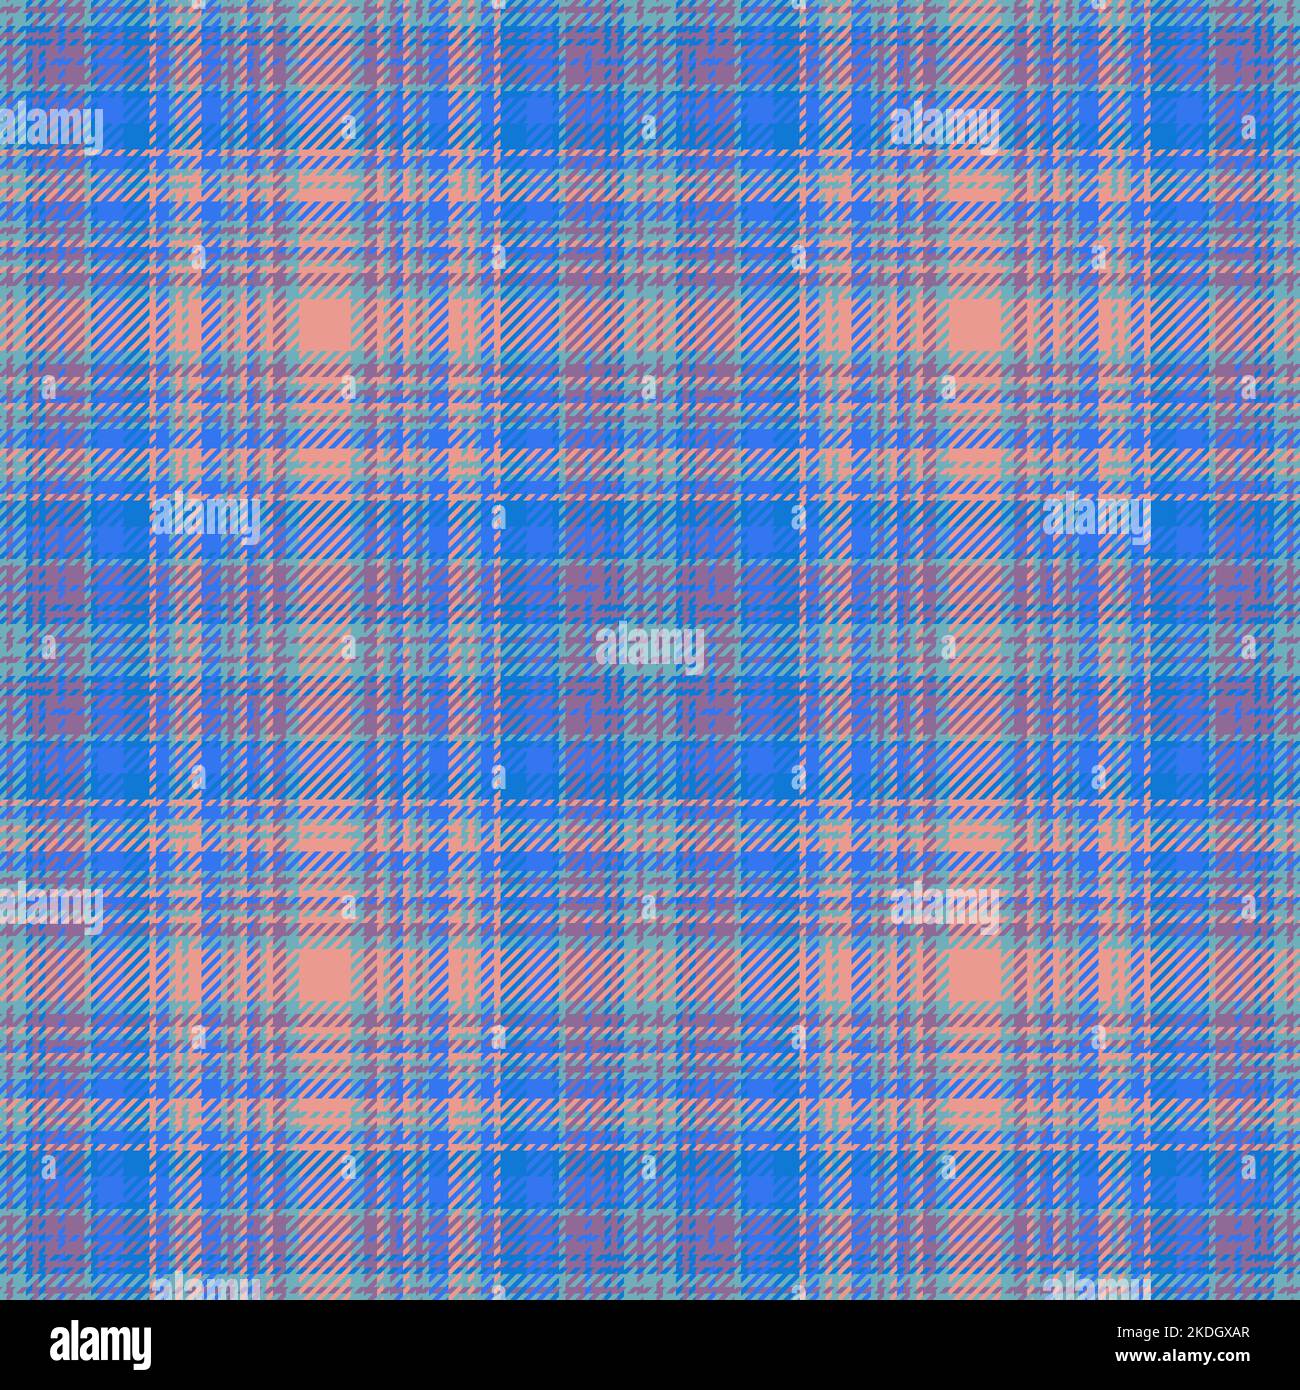 Pattern check vector. Plaid fabric background. Texture seamless tartan textile in blue and pastel colors. Stock Vector